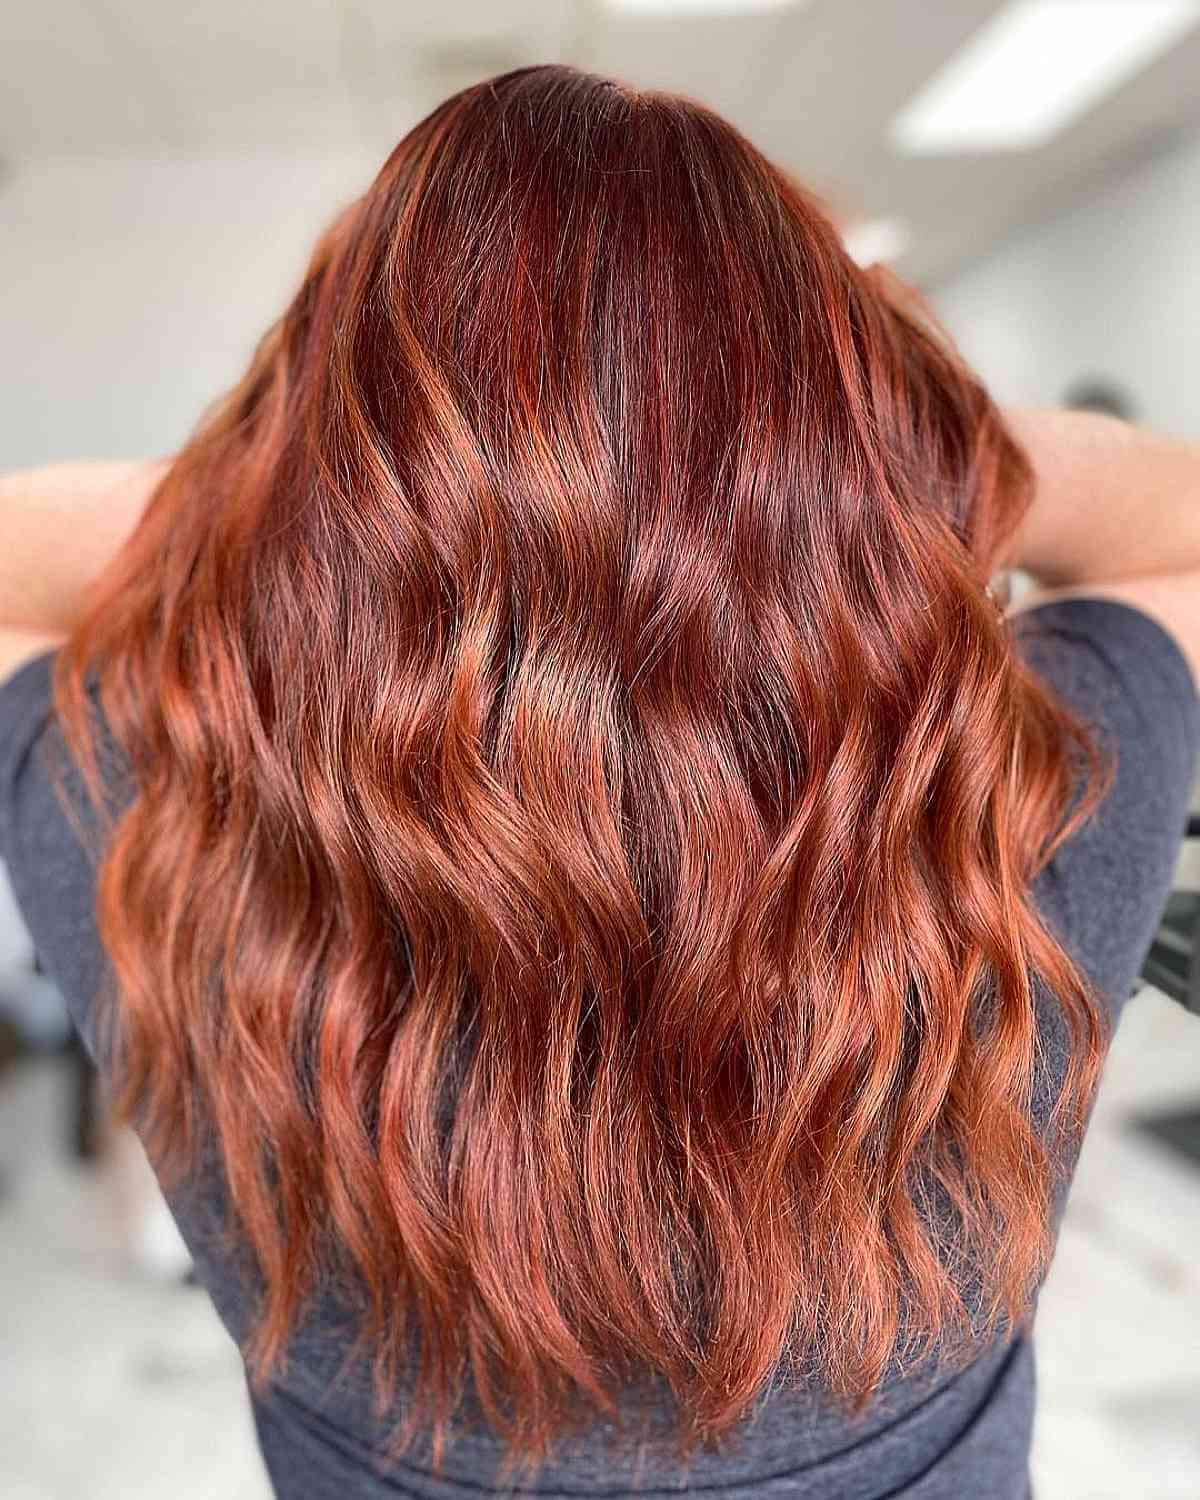 All-Over Dark Copper Hair Color